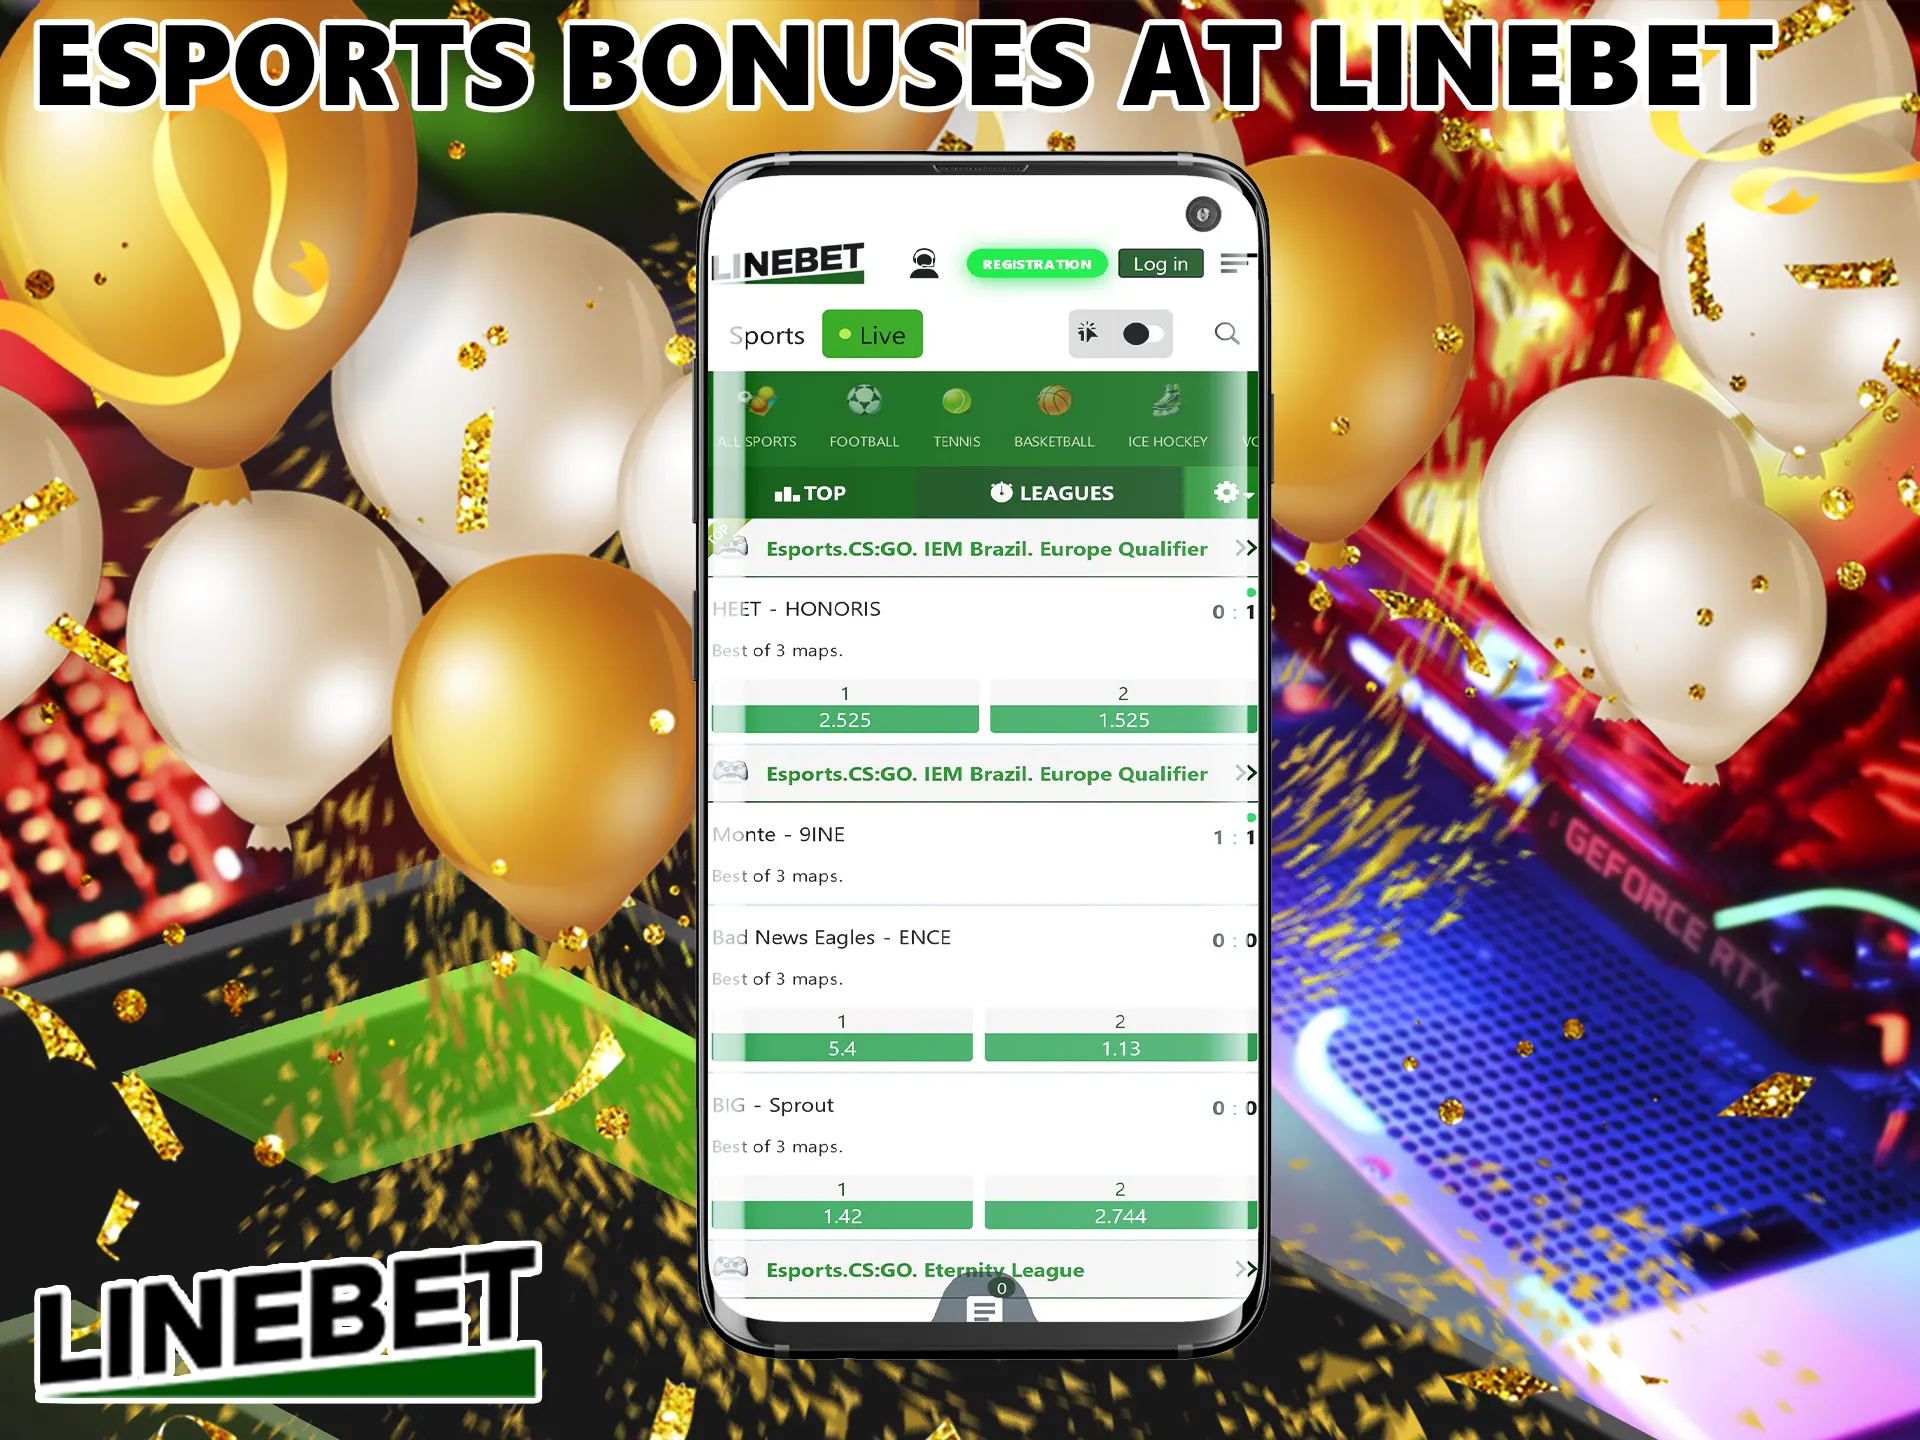 New Linebet players from India will get a chance to win up to 8862 INR, a one-time bonus that must be used within 30 days.